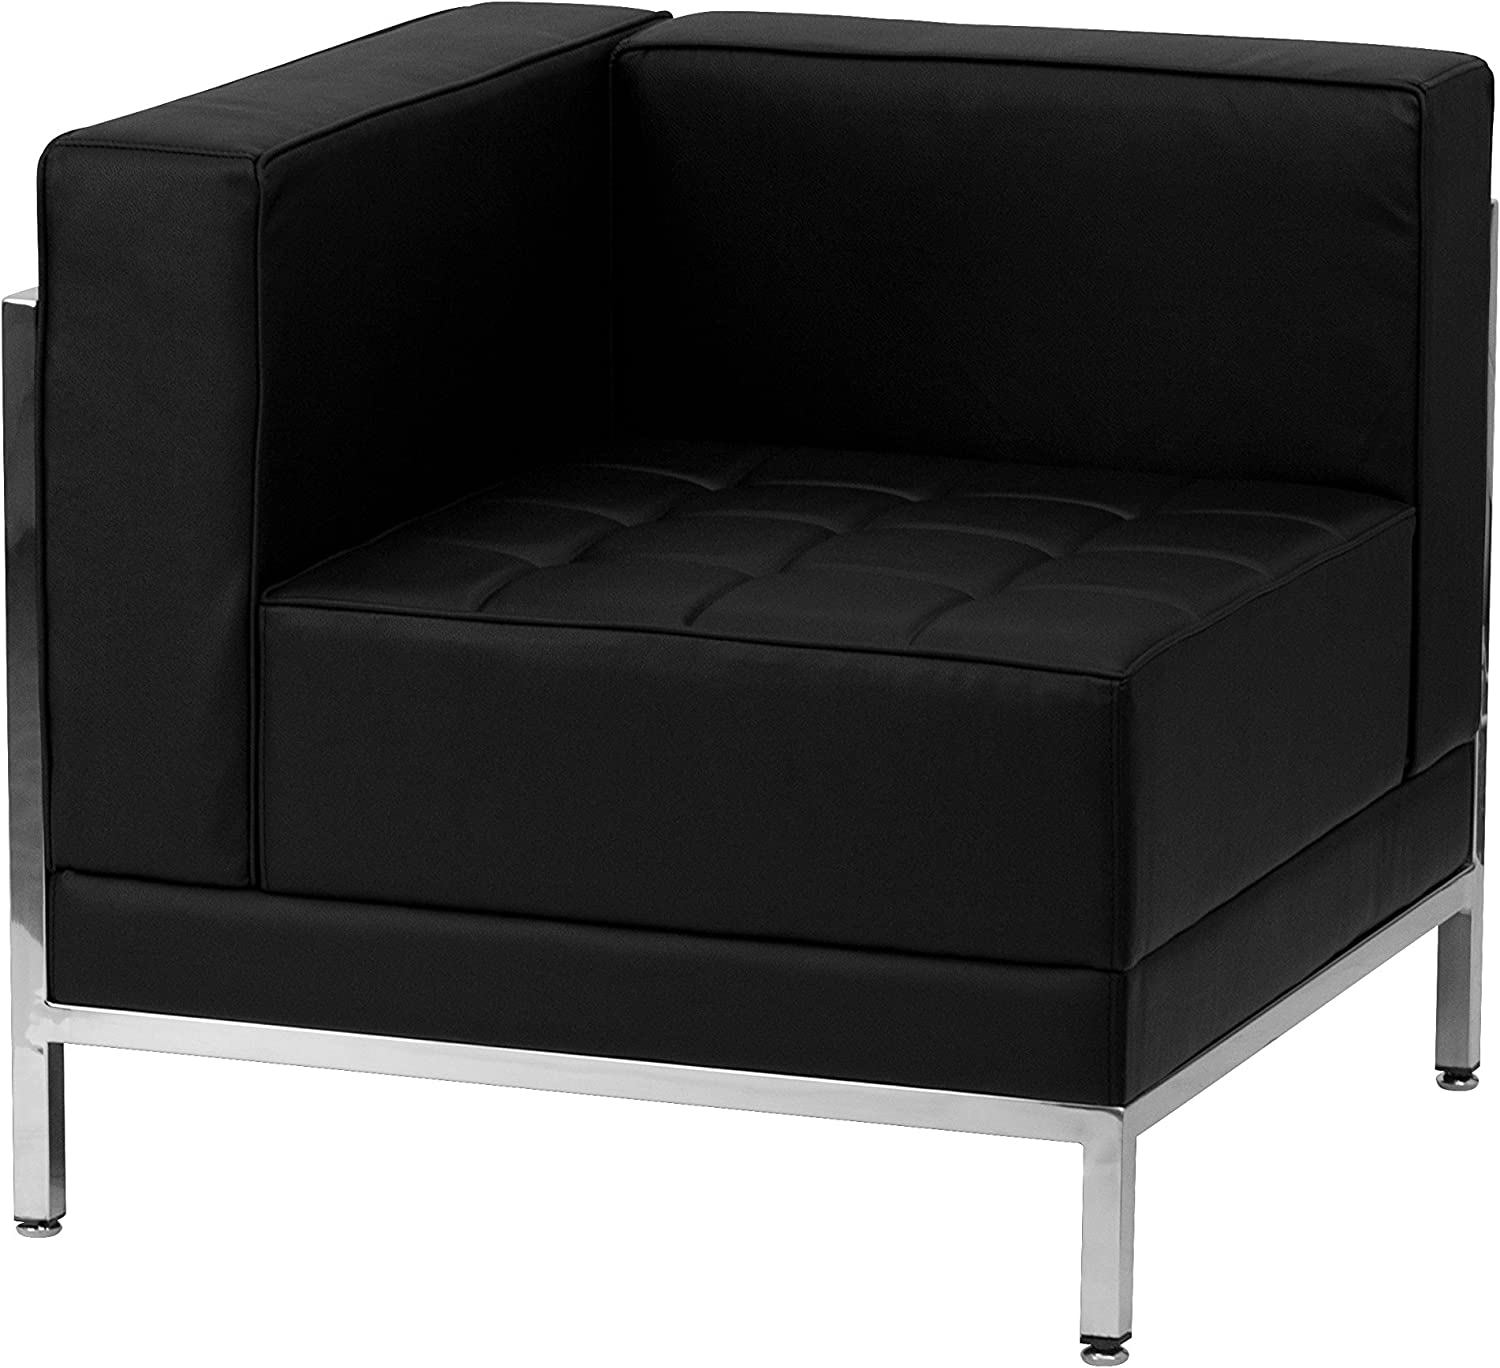 Flash Furniture HERCULES Imagination Series Contemporary Black LeatherSoft Left Corner Chair with Encasing Frame